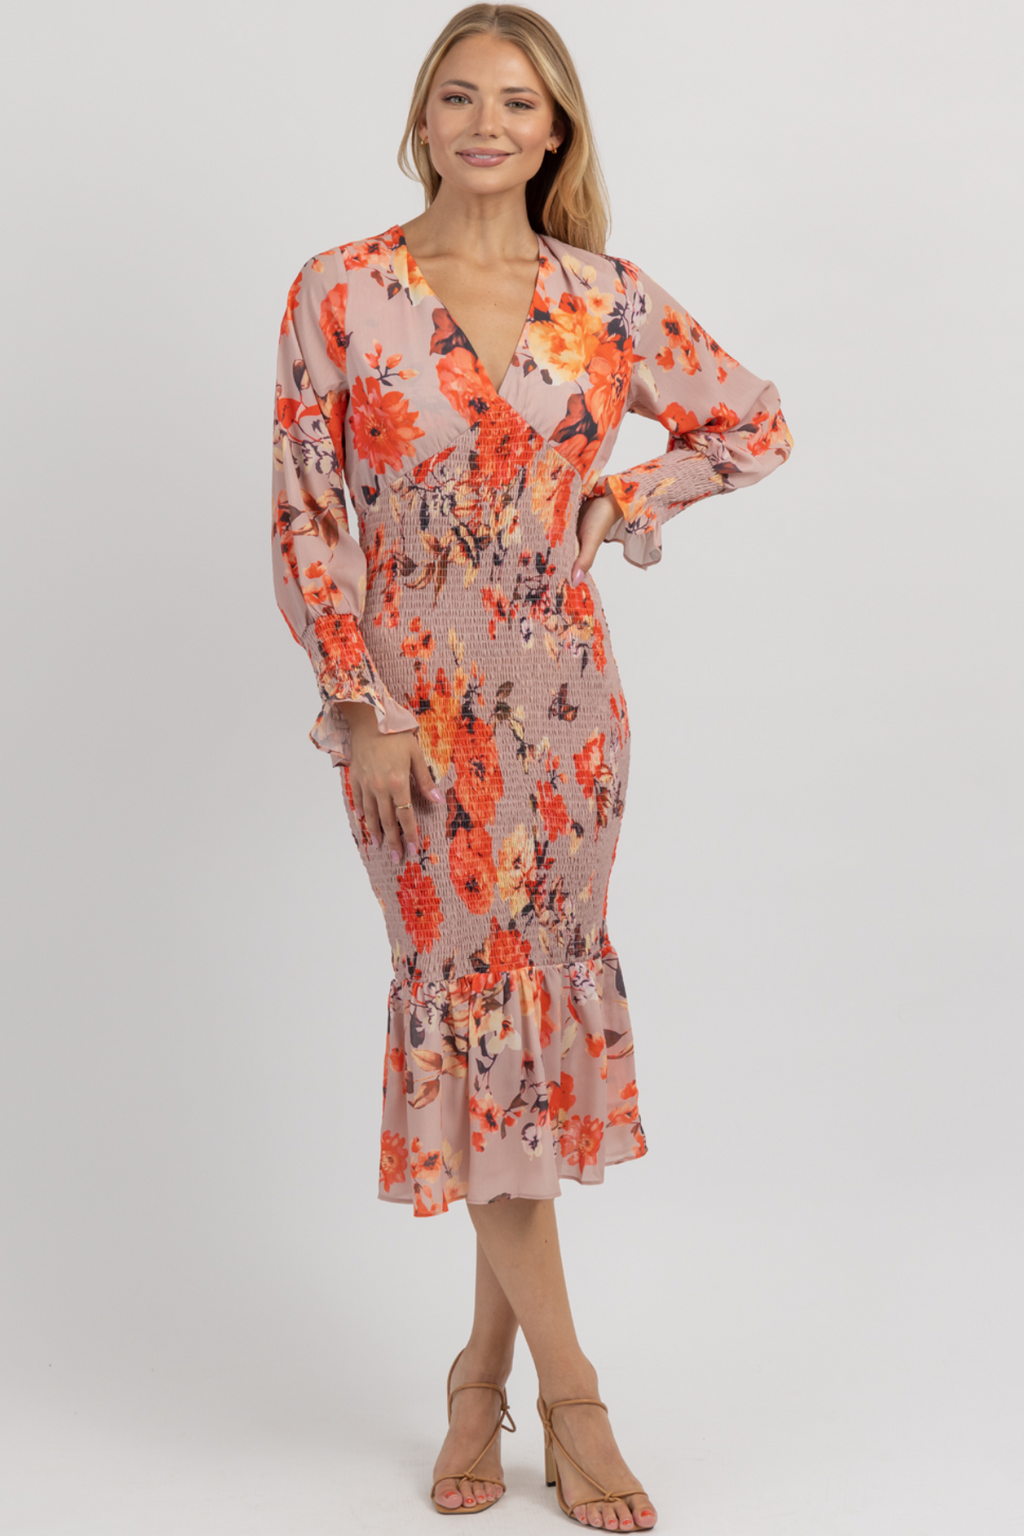 CORAL FLORAL PUFF + SMOCK MAXI DRESS